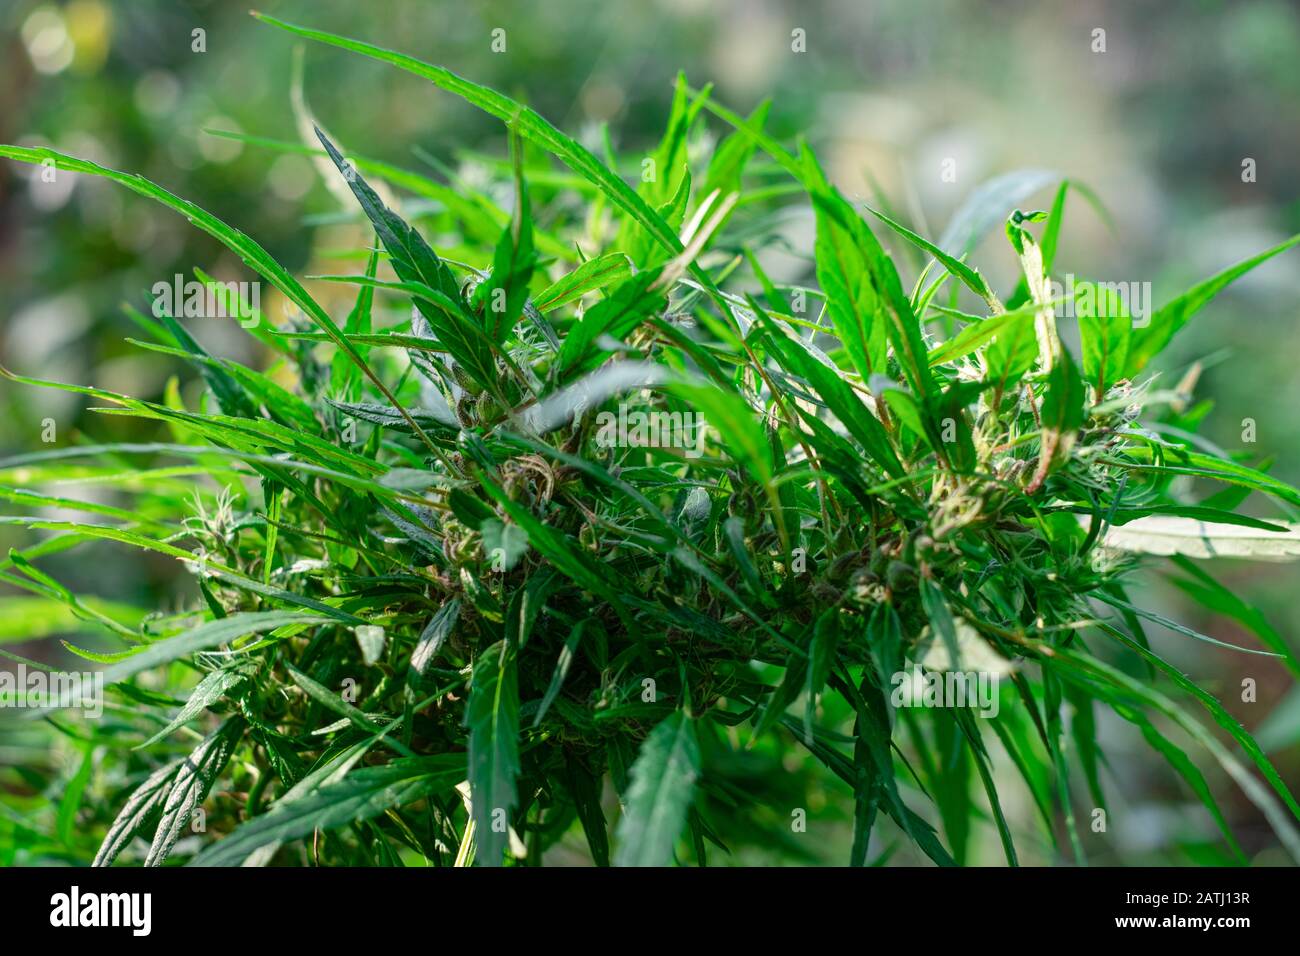 Fresh green medicinal plant cannabis blooming at blurred background close up, Marijuana plant with early flowers, sativa leaves Stock Photo